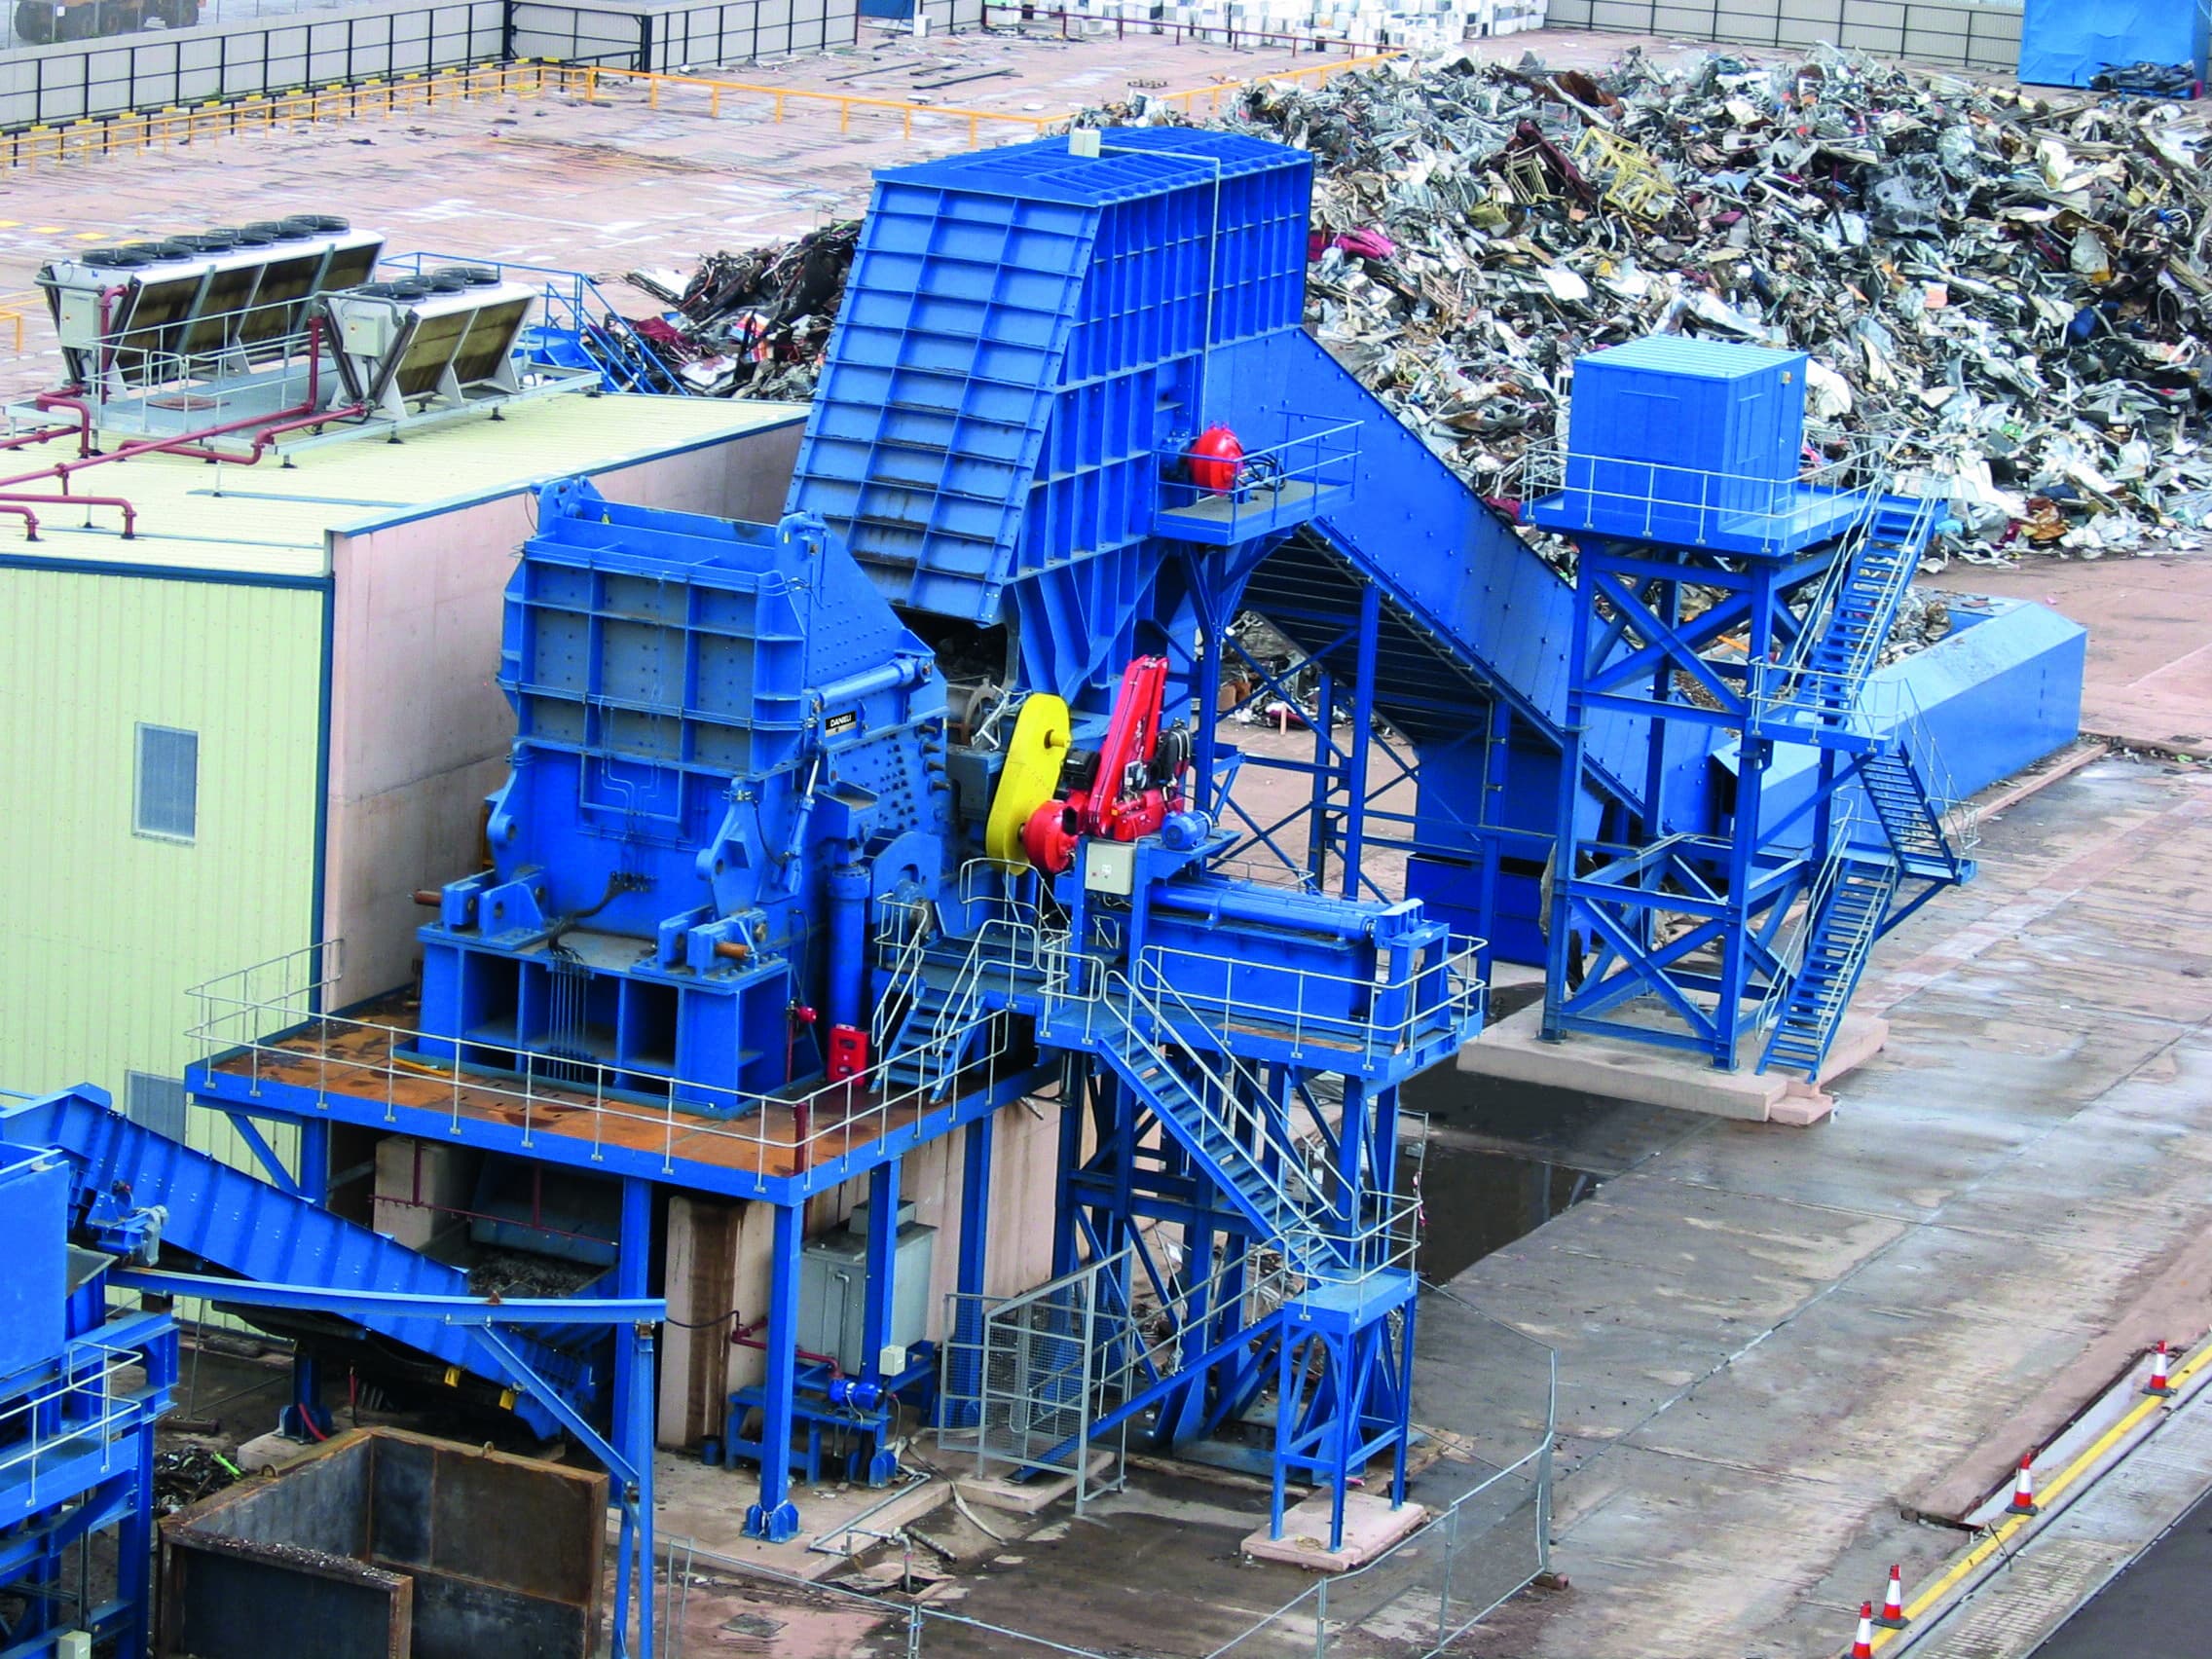 Machinery making energy from waste